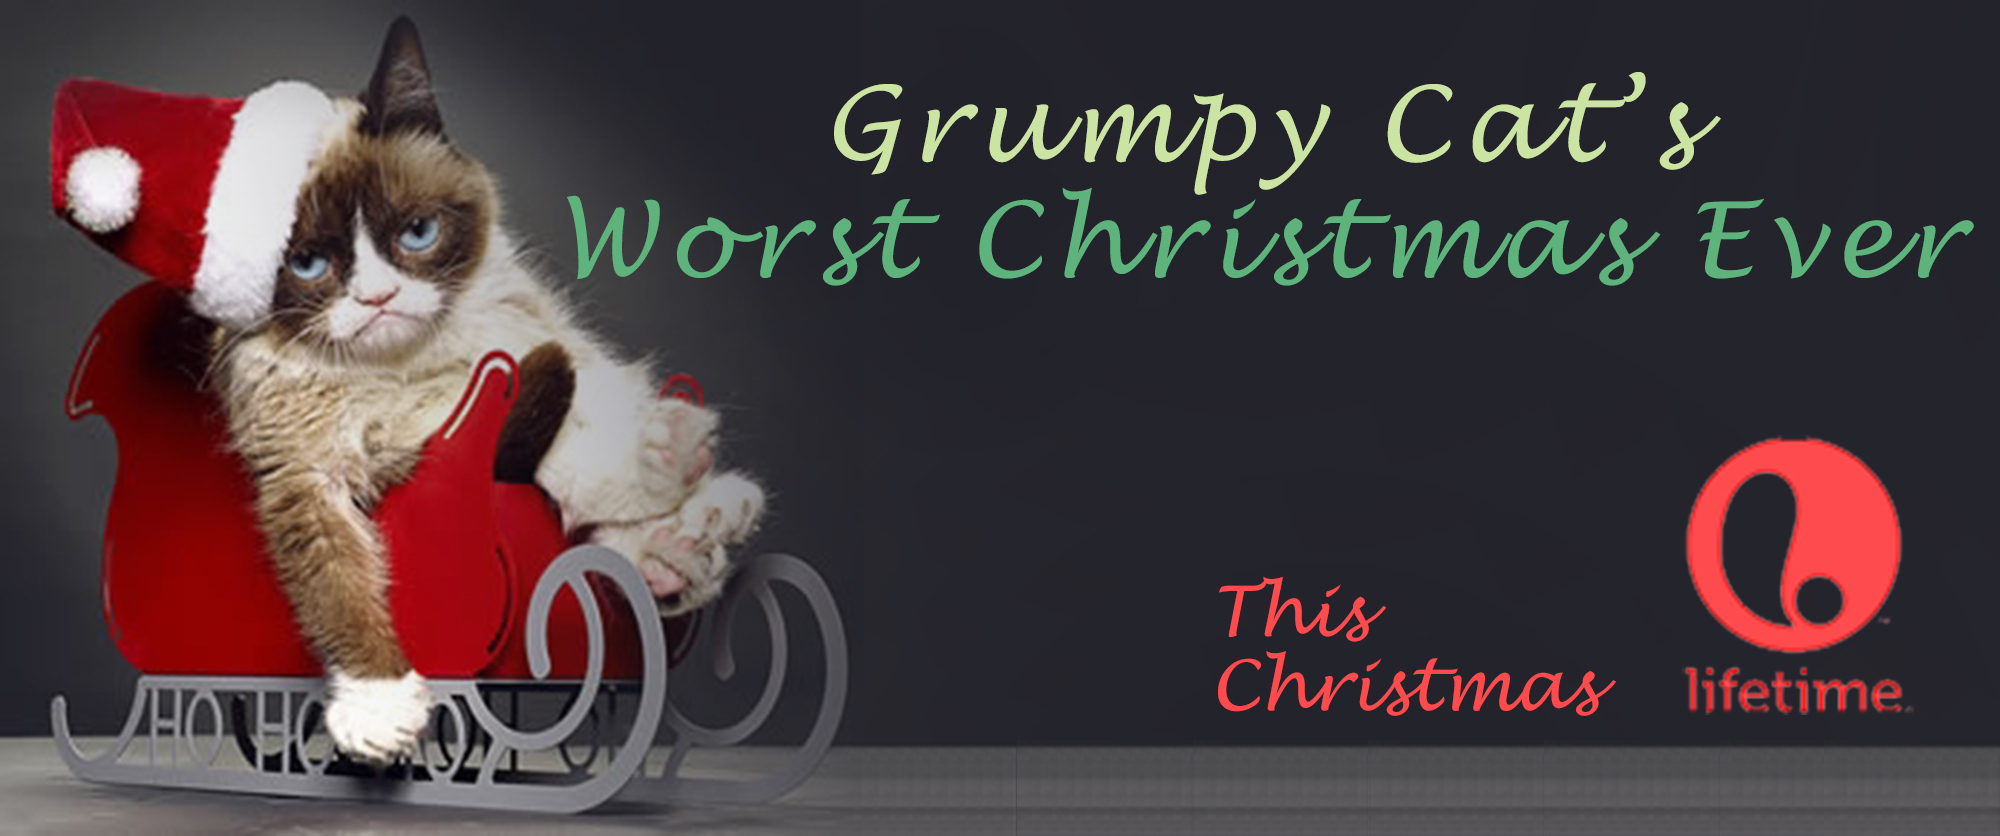 Nice Images Collection: Grumpy Cat's Worst Christmas Ever Desktop Wallpapers